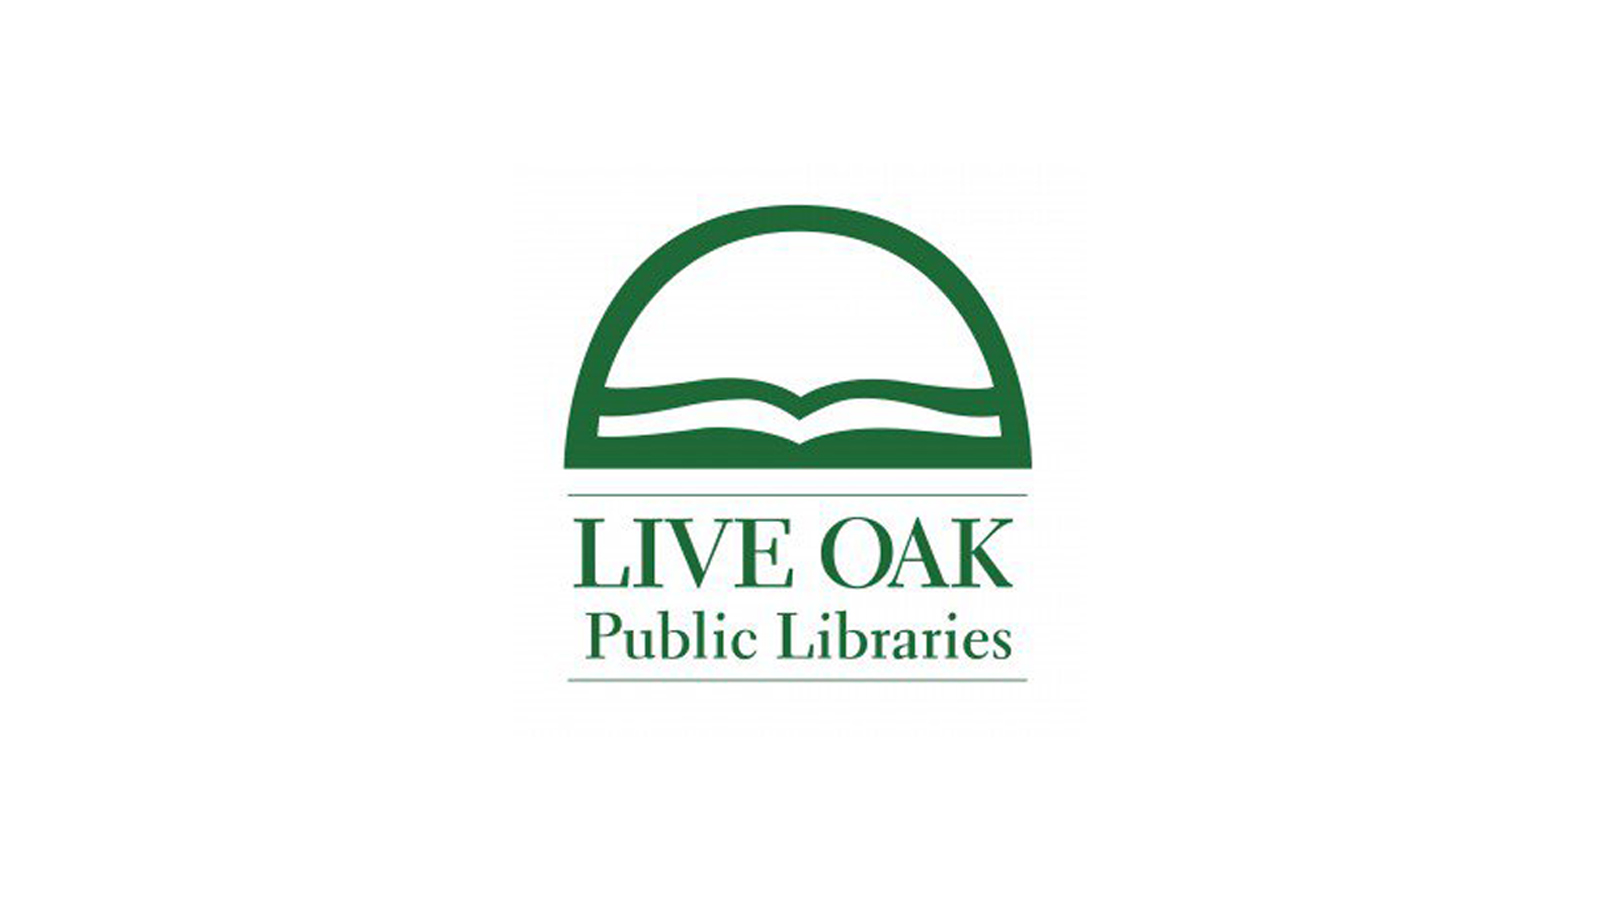 Live Oak Public Libraries in Savannah Turns to Comcast Business for